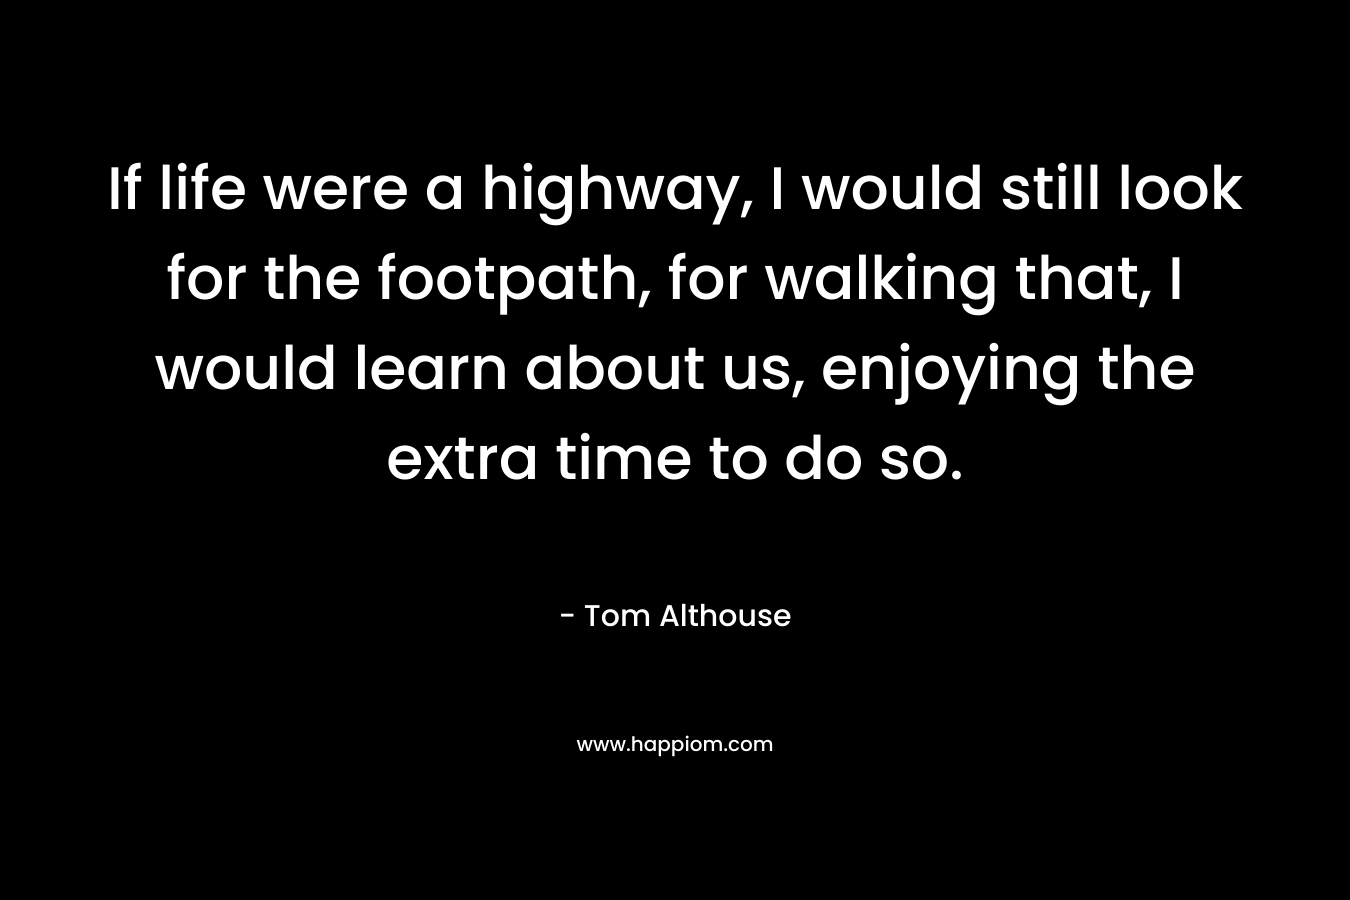 If life were a highway, I would still look for the footpath, for walking that, I would learn about us, enjoying the extra time to do so. – Tom Althouse